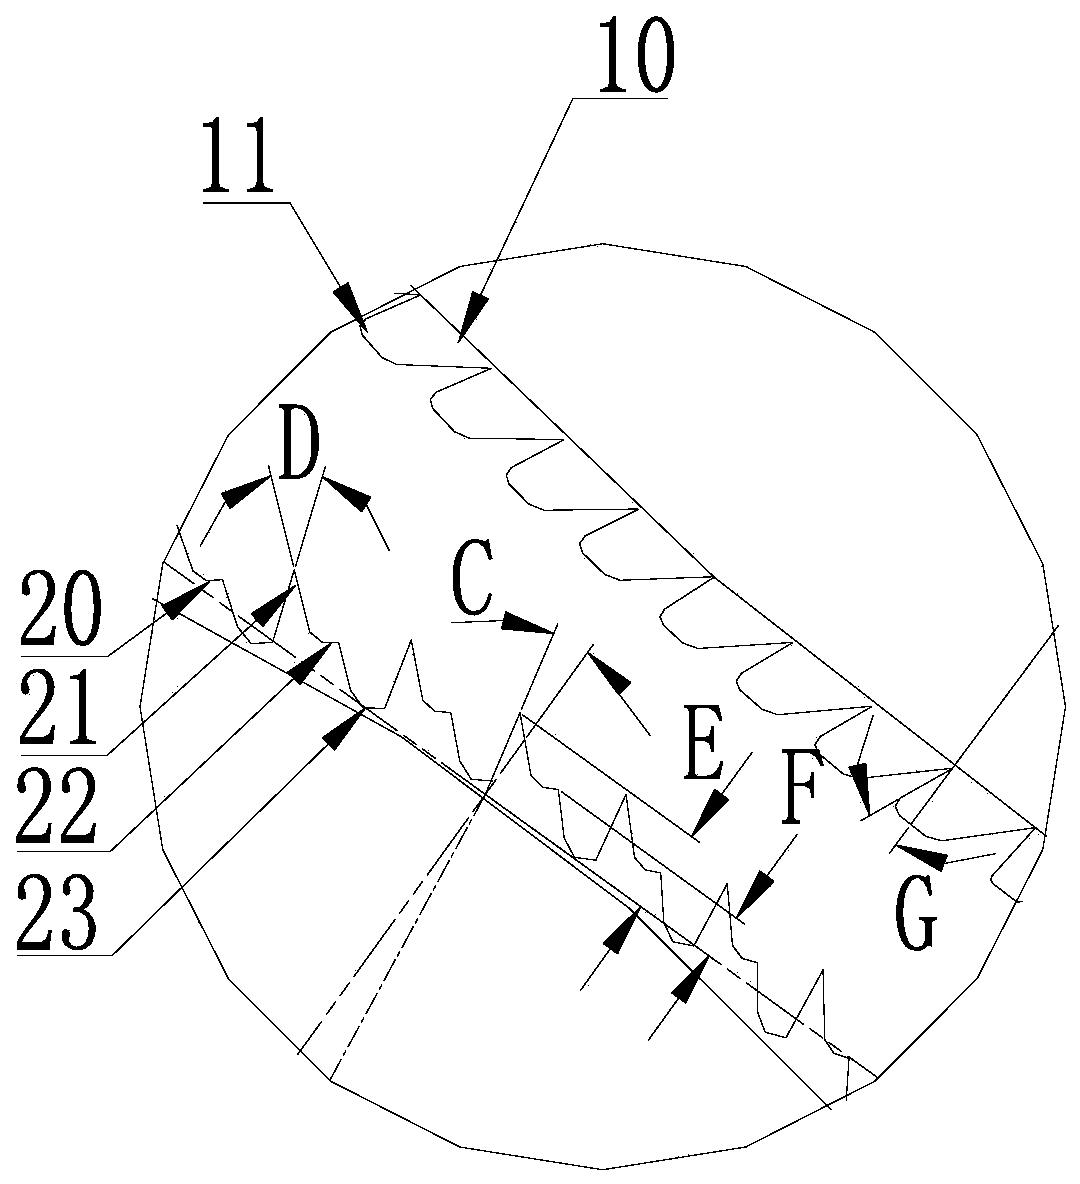 An oscillating carding mechanism for opening vegetable dyed fibers